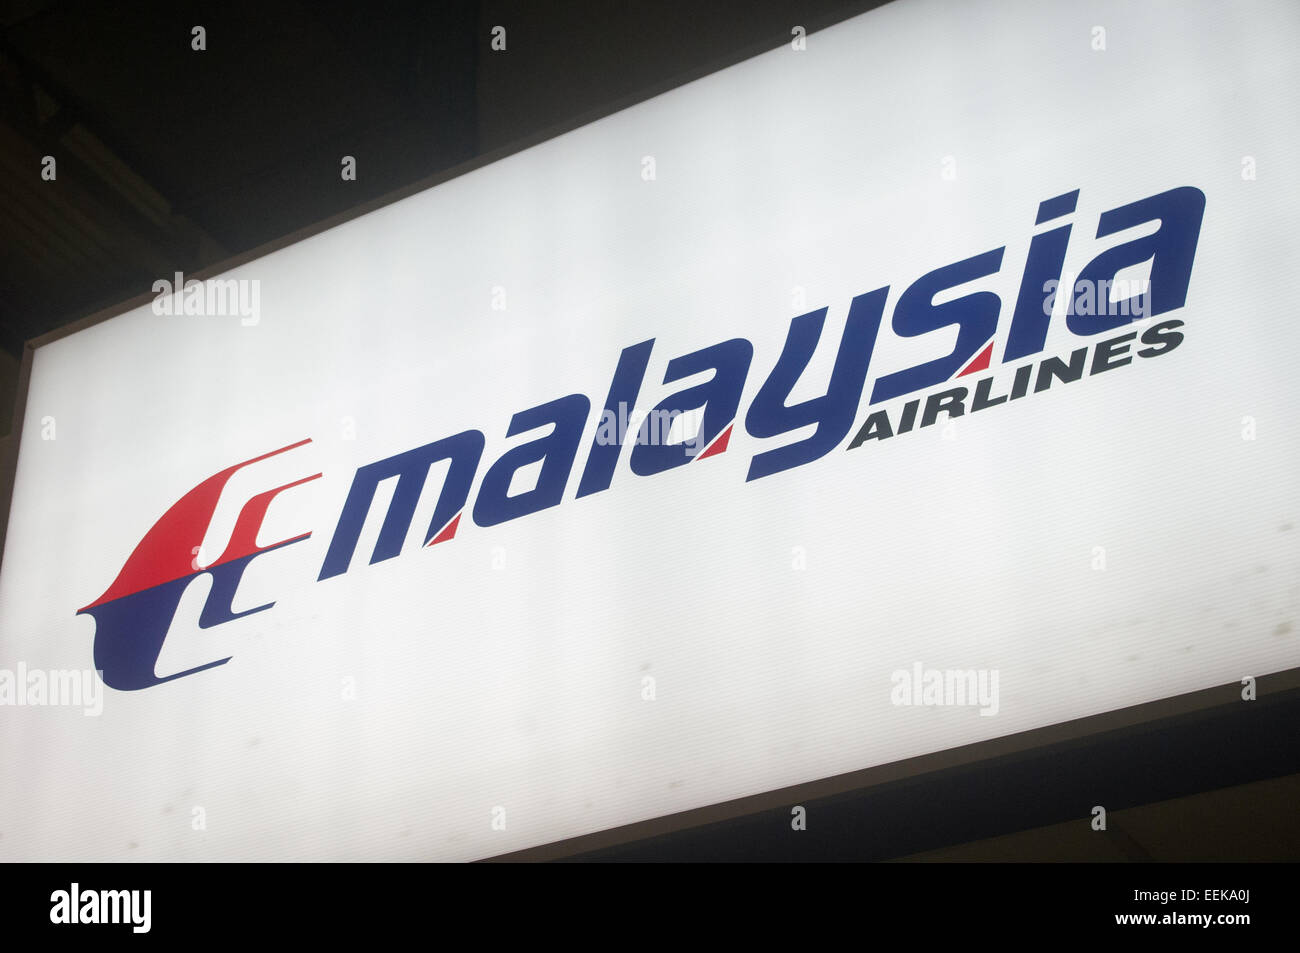 Malaysia airline signboard in airport. Stock Photo